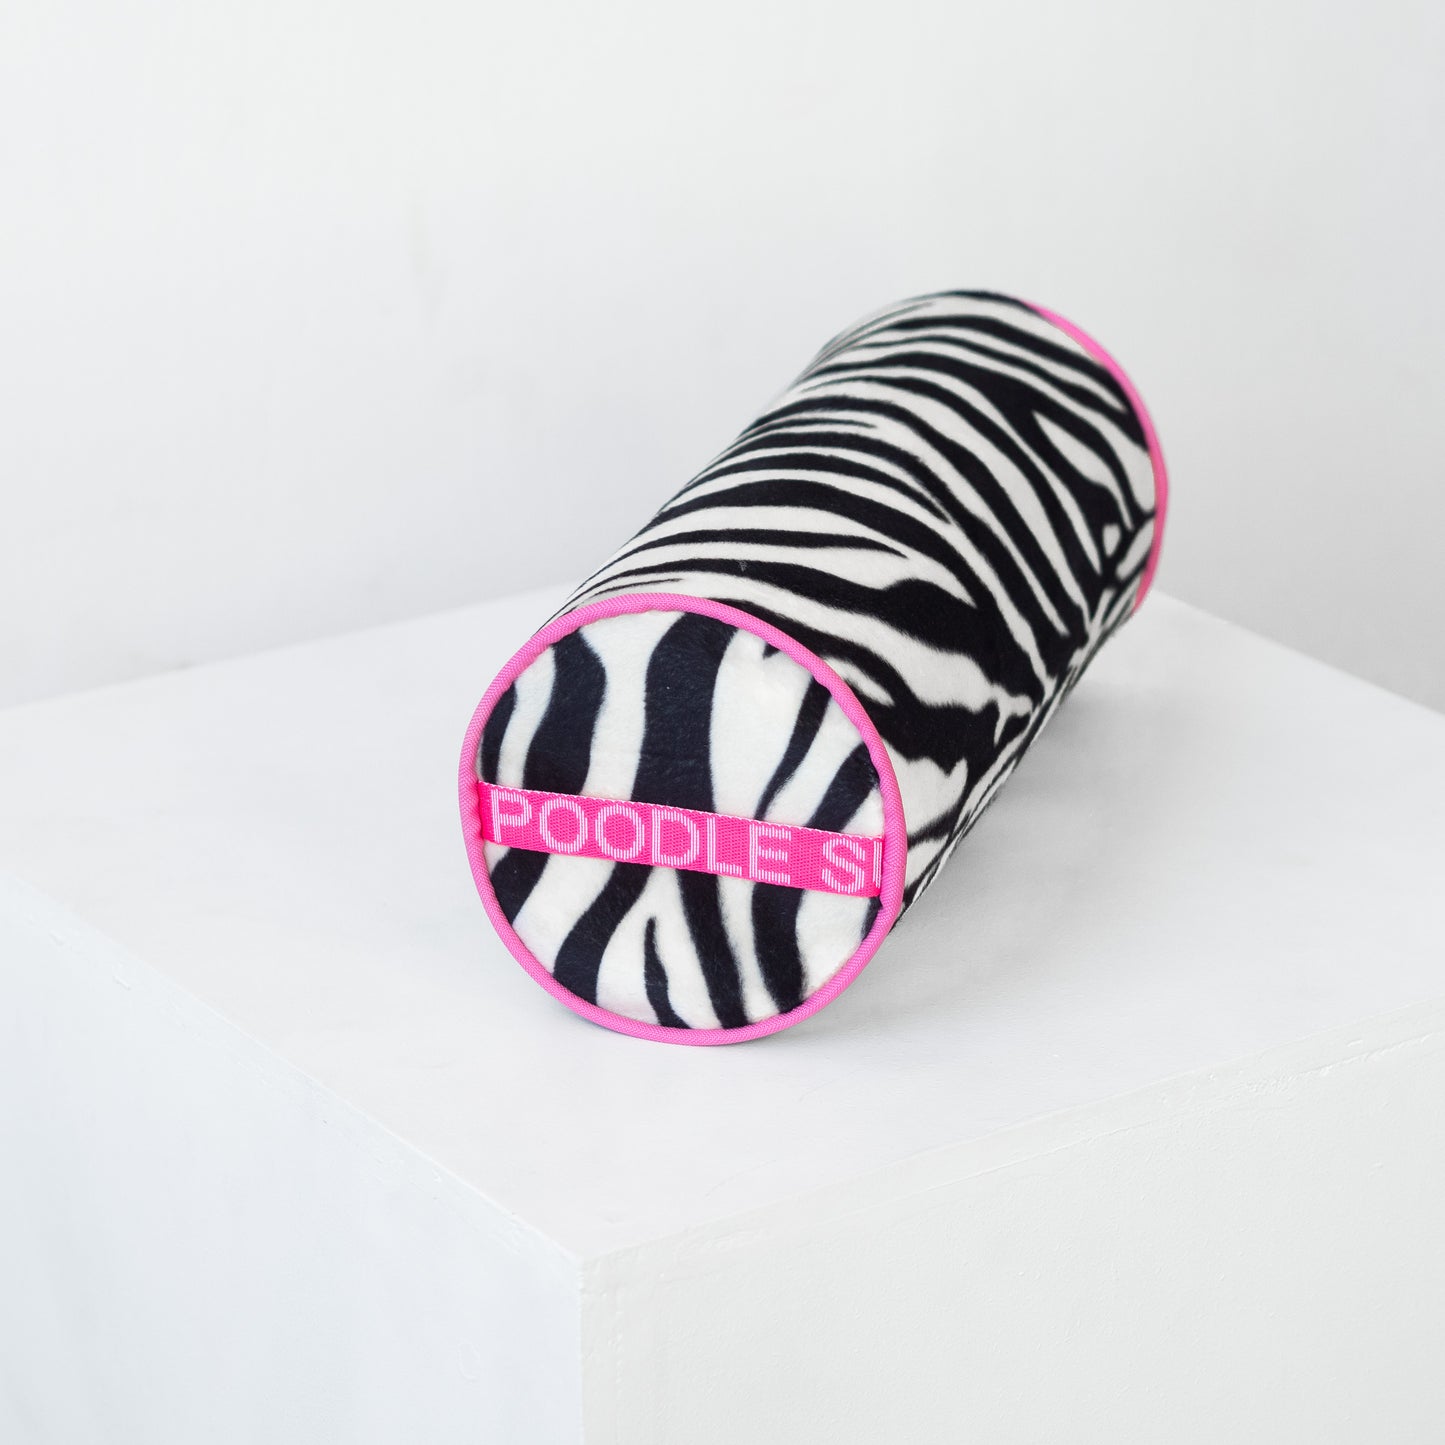 Poodle Supply Top Knot Pillow - Lord Zebra - Medium